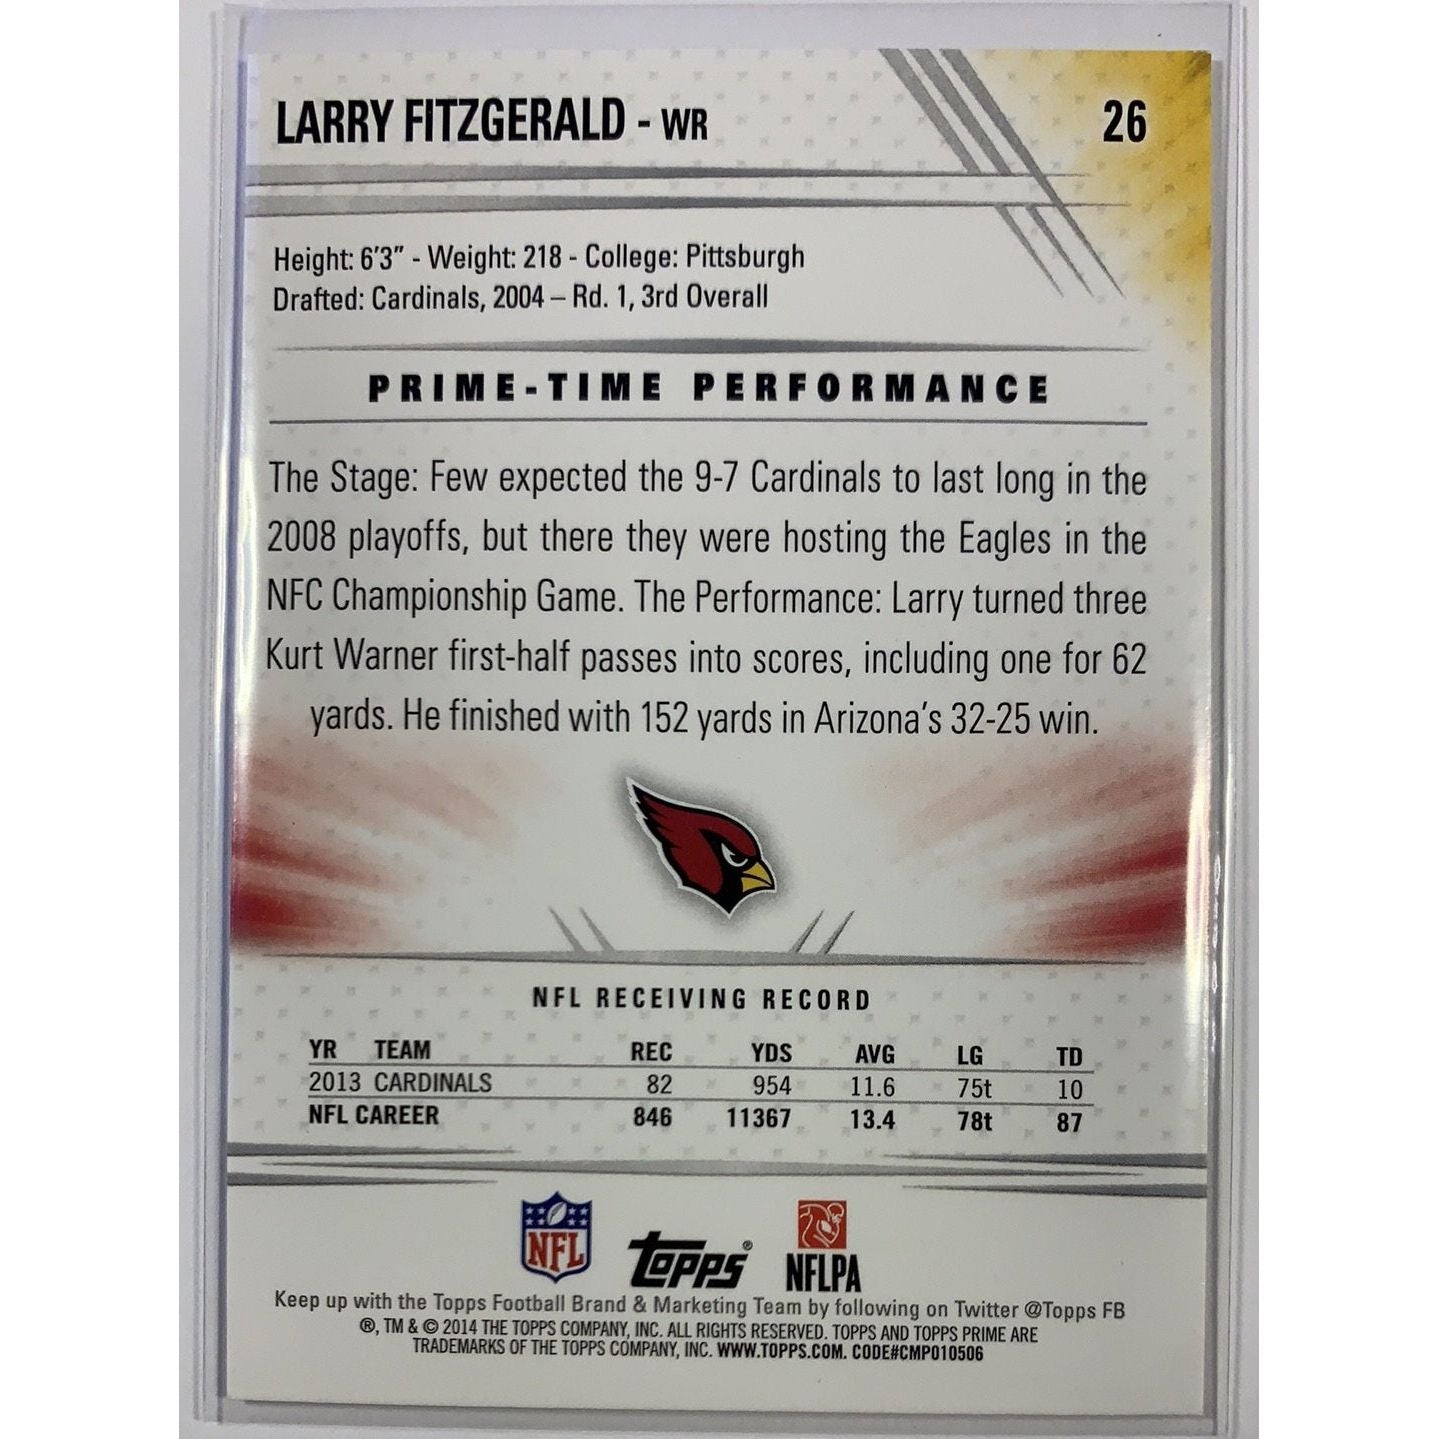  2014 Topps Larry Fitzgerald Base #26  Local Legends Cards & Collectibles